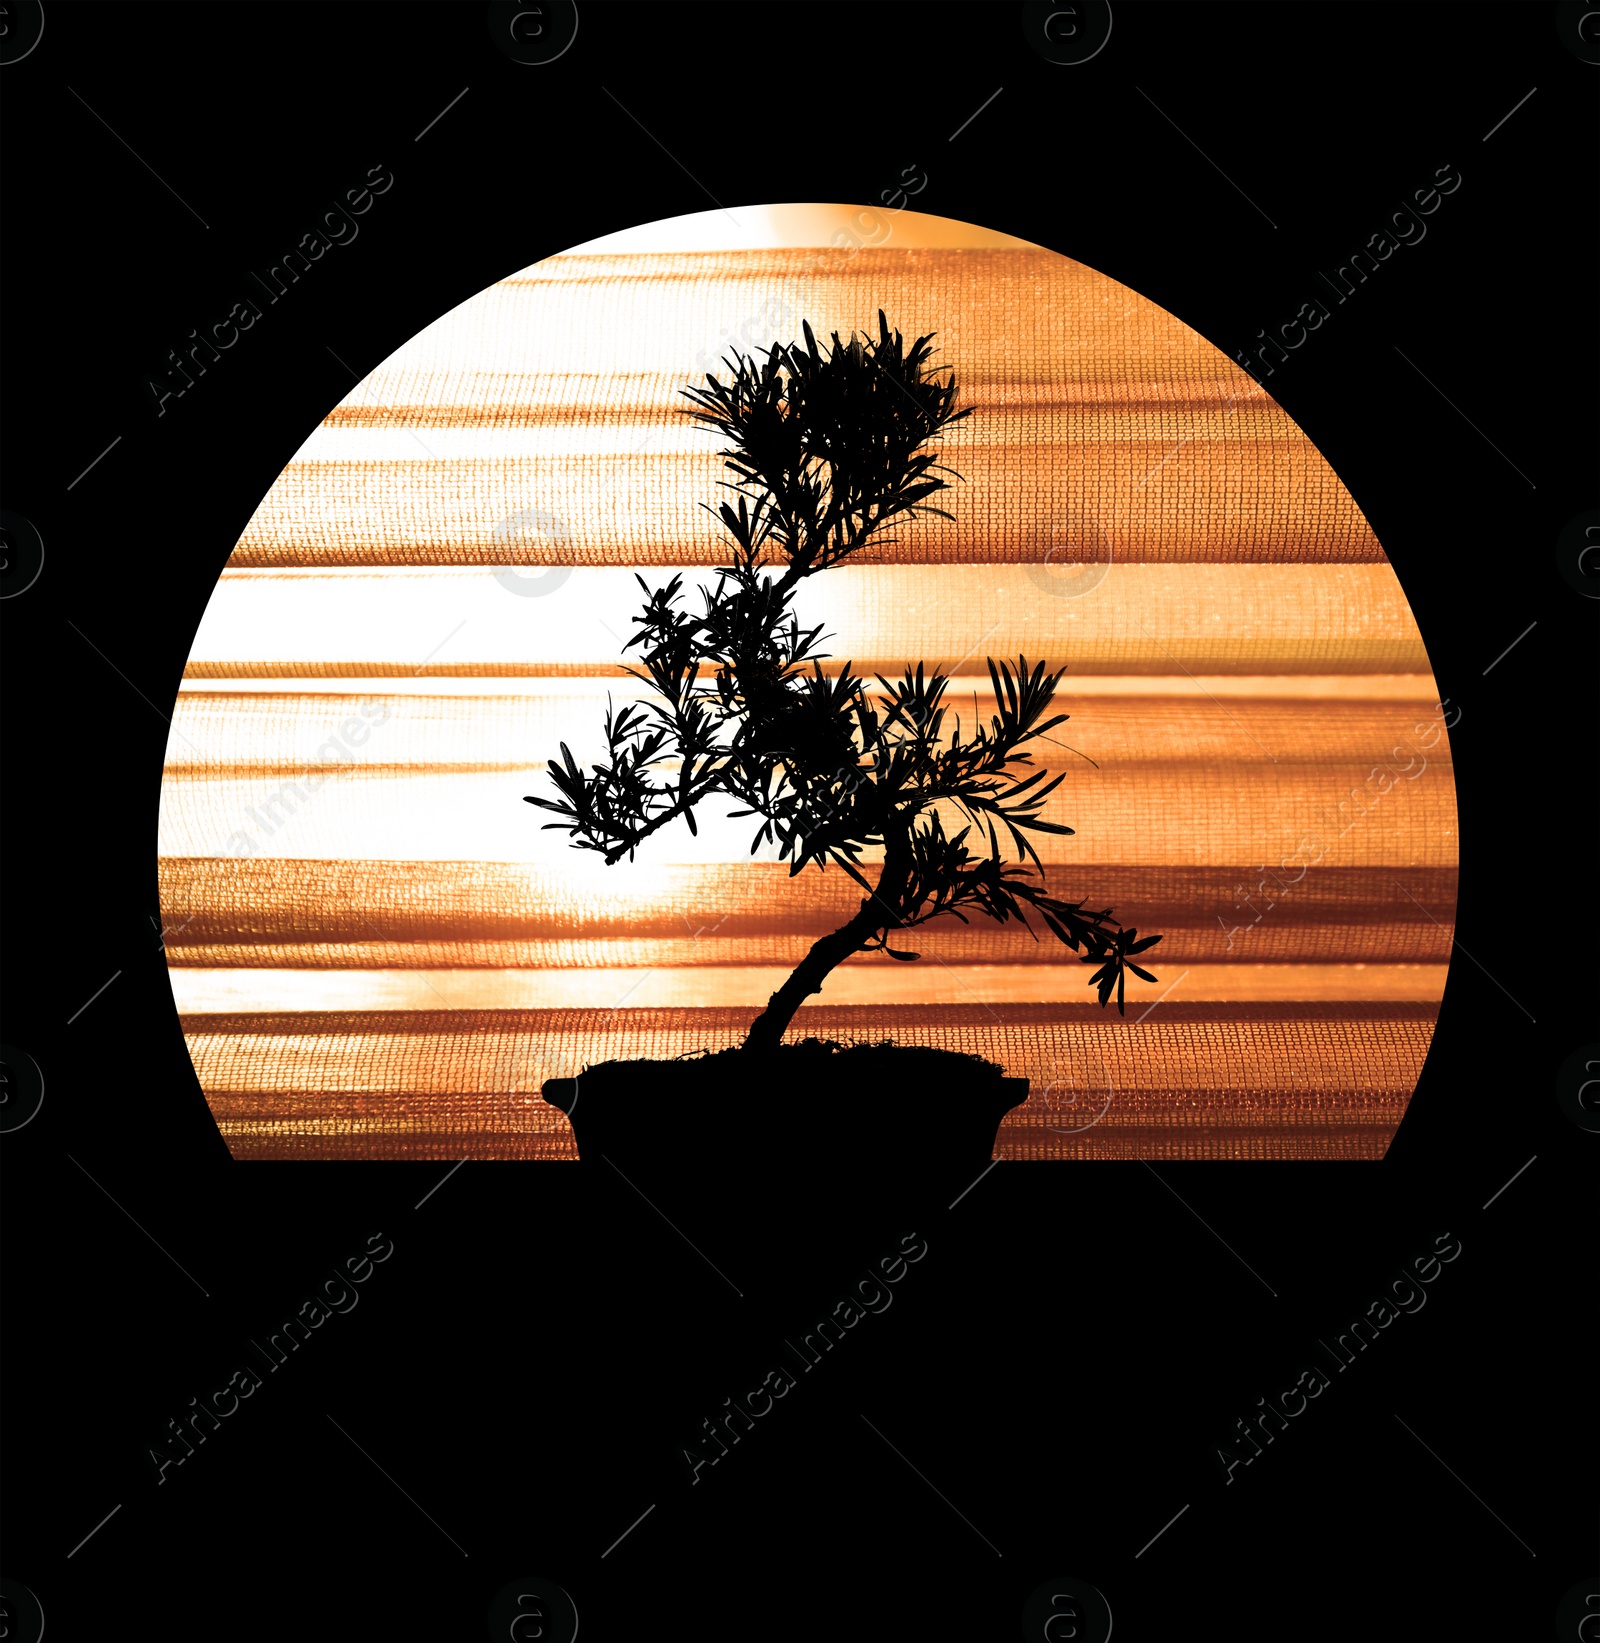 Image of Silhouette of Japanese bonsai plant. Creating zen atmosphere at home